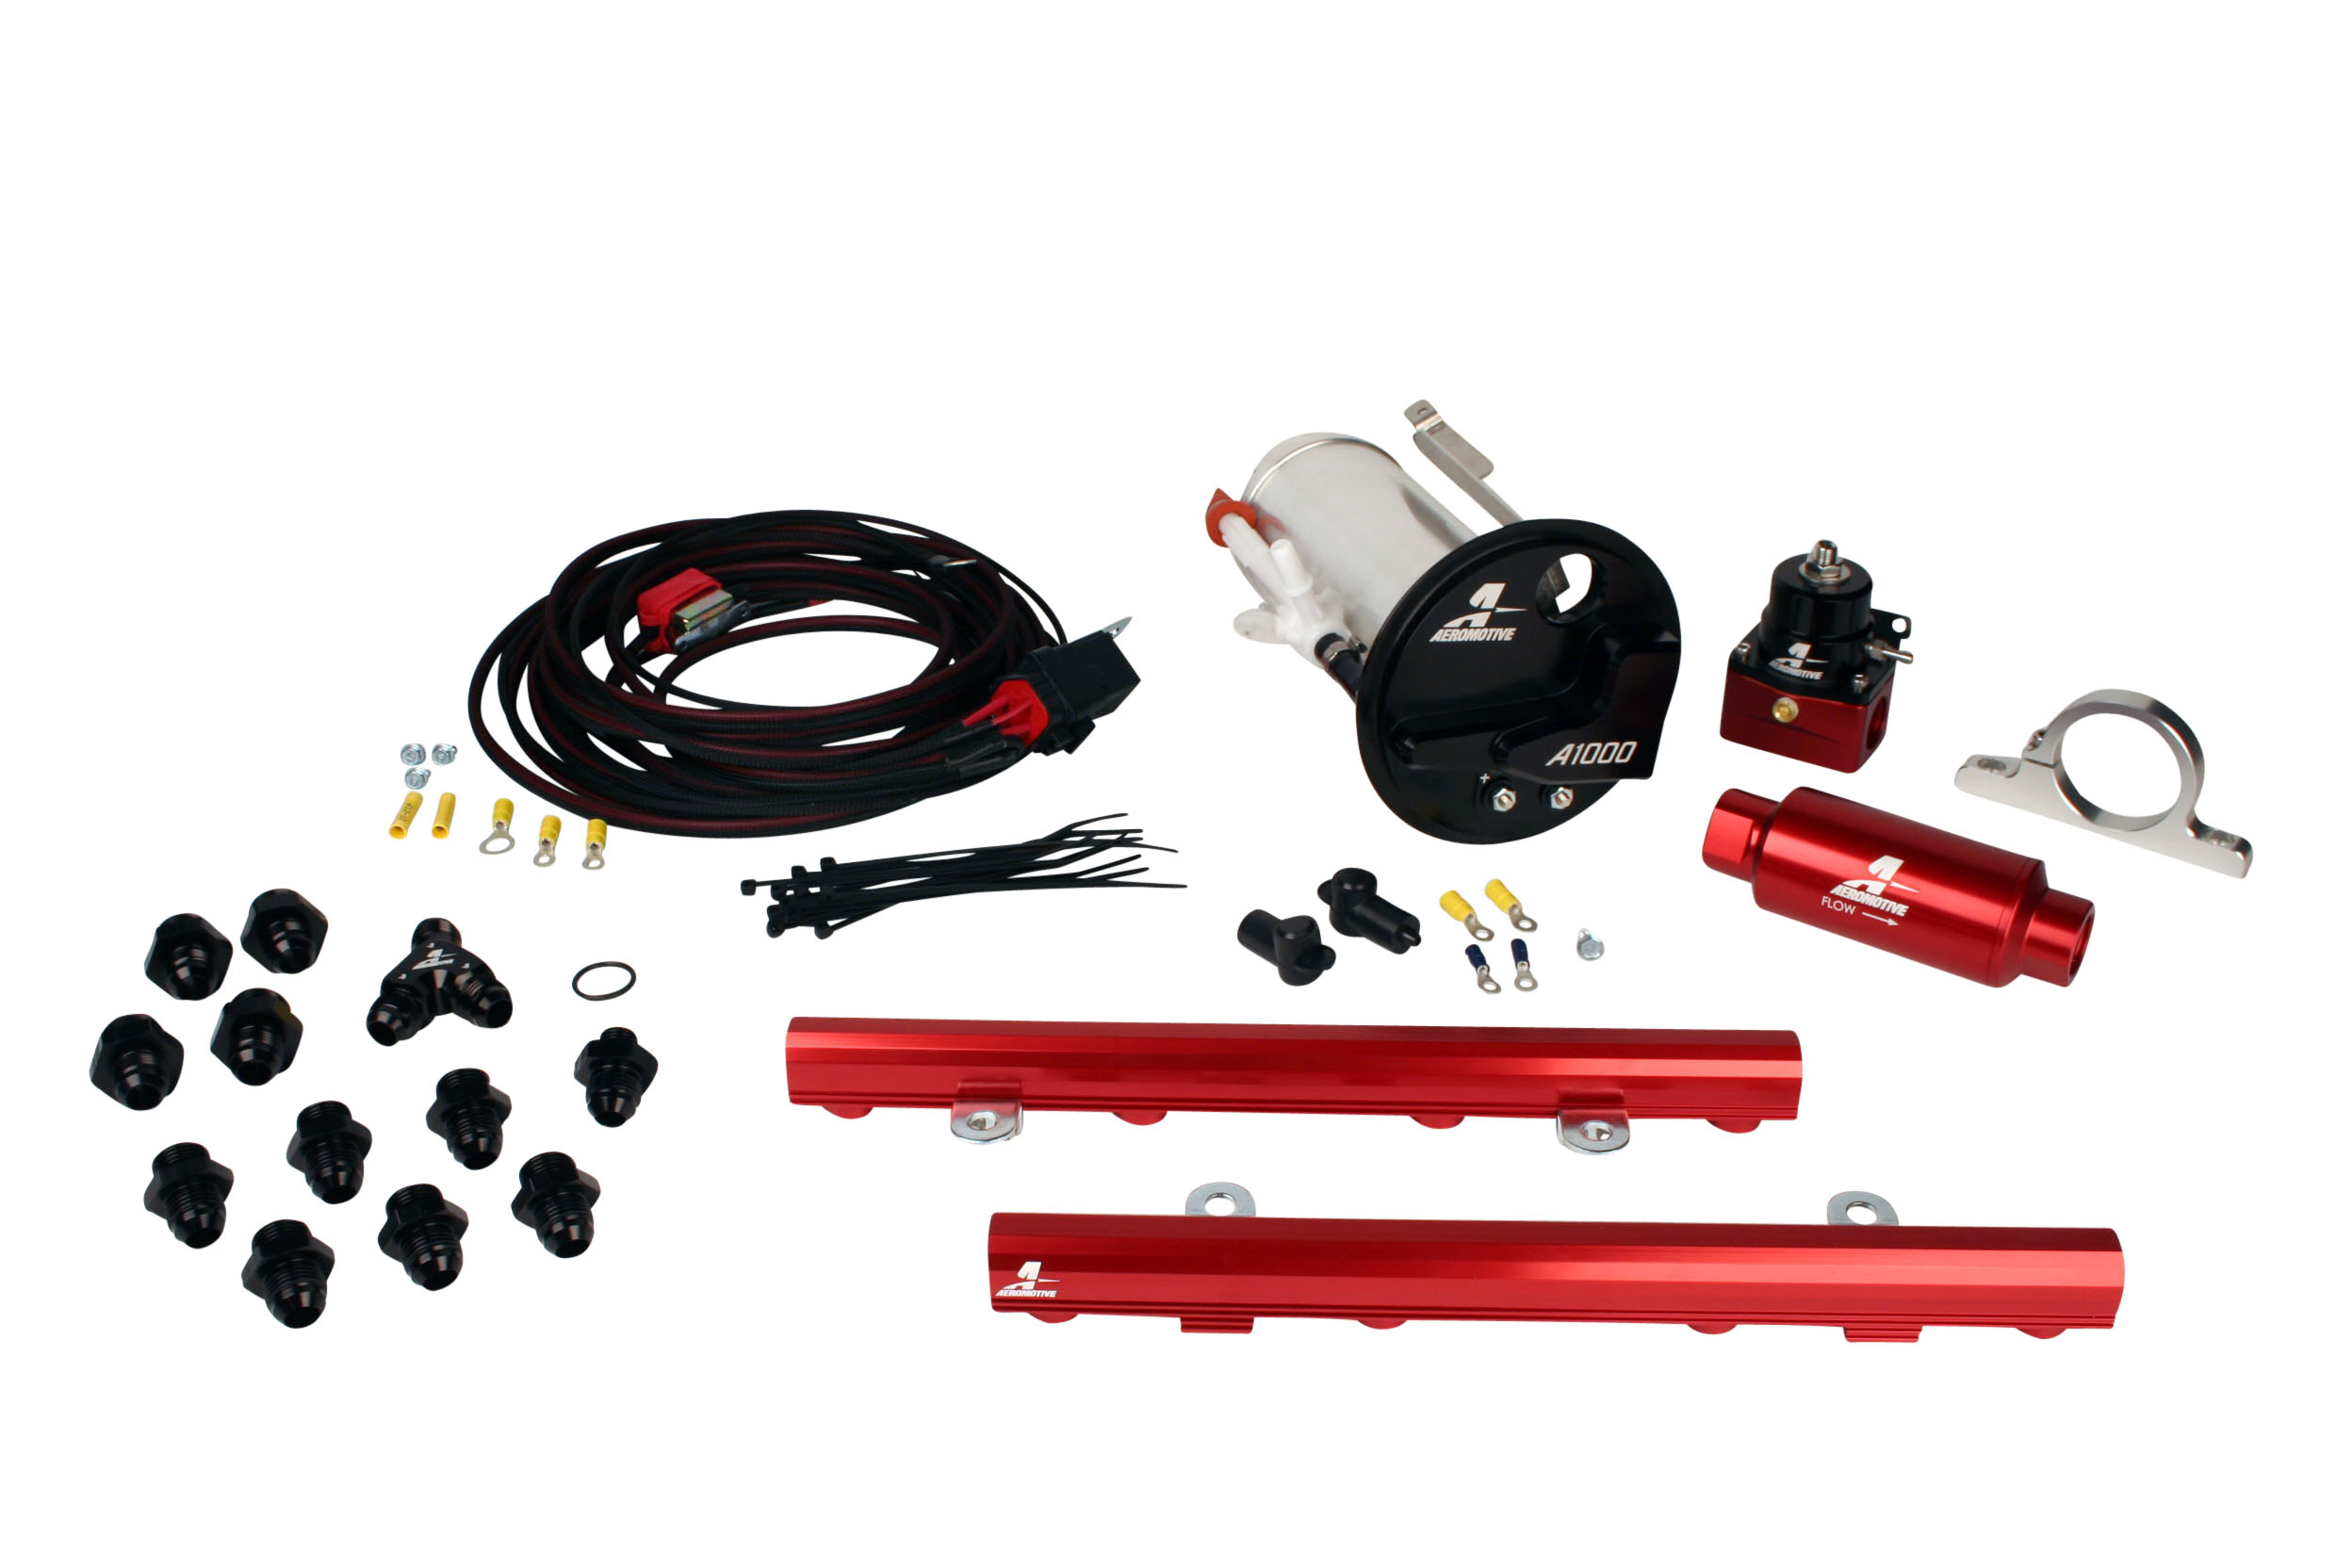 2007-2012 Ford Mustang Shelby GT500 Aeromotive Stealth A1000 Race Fuel System w/5.0L 4-V Fuel Rails